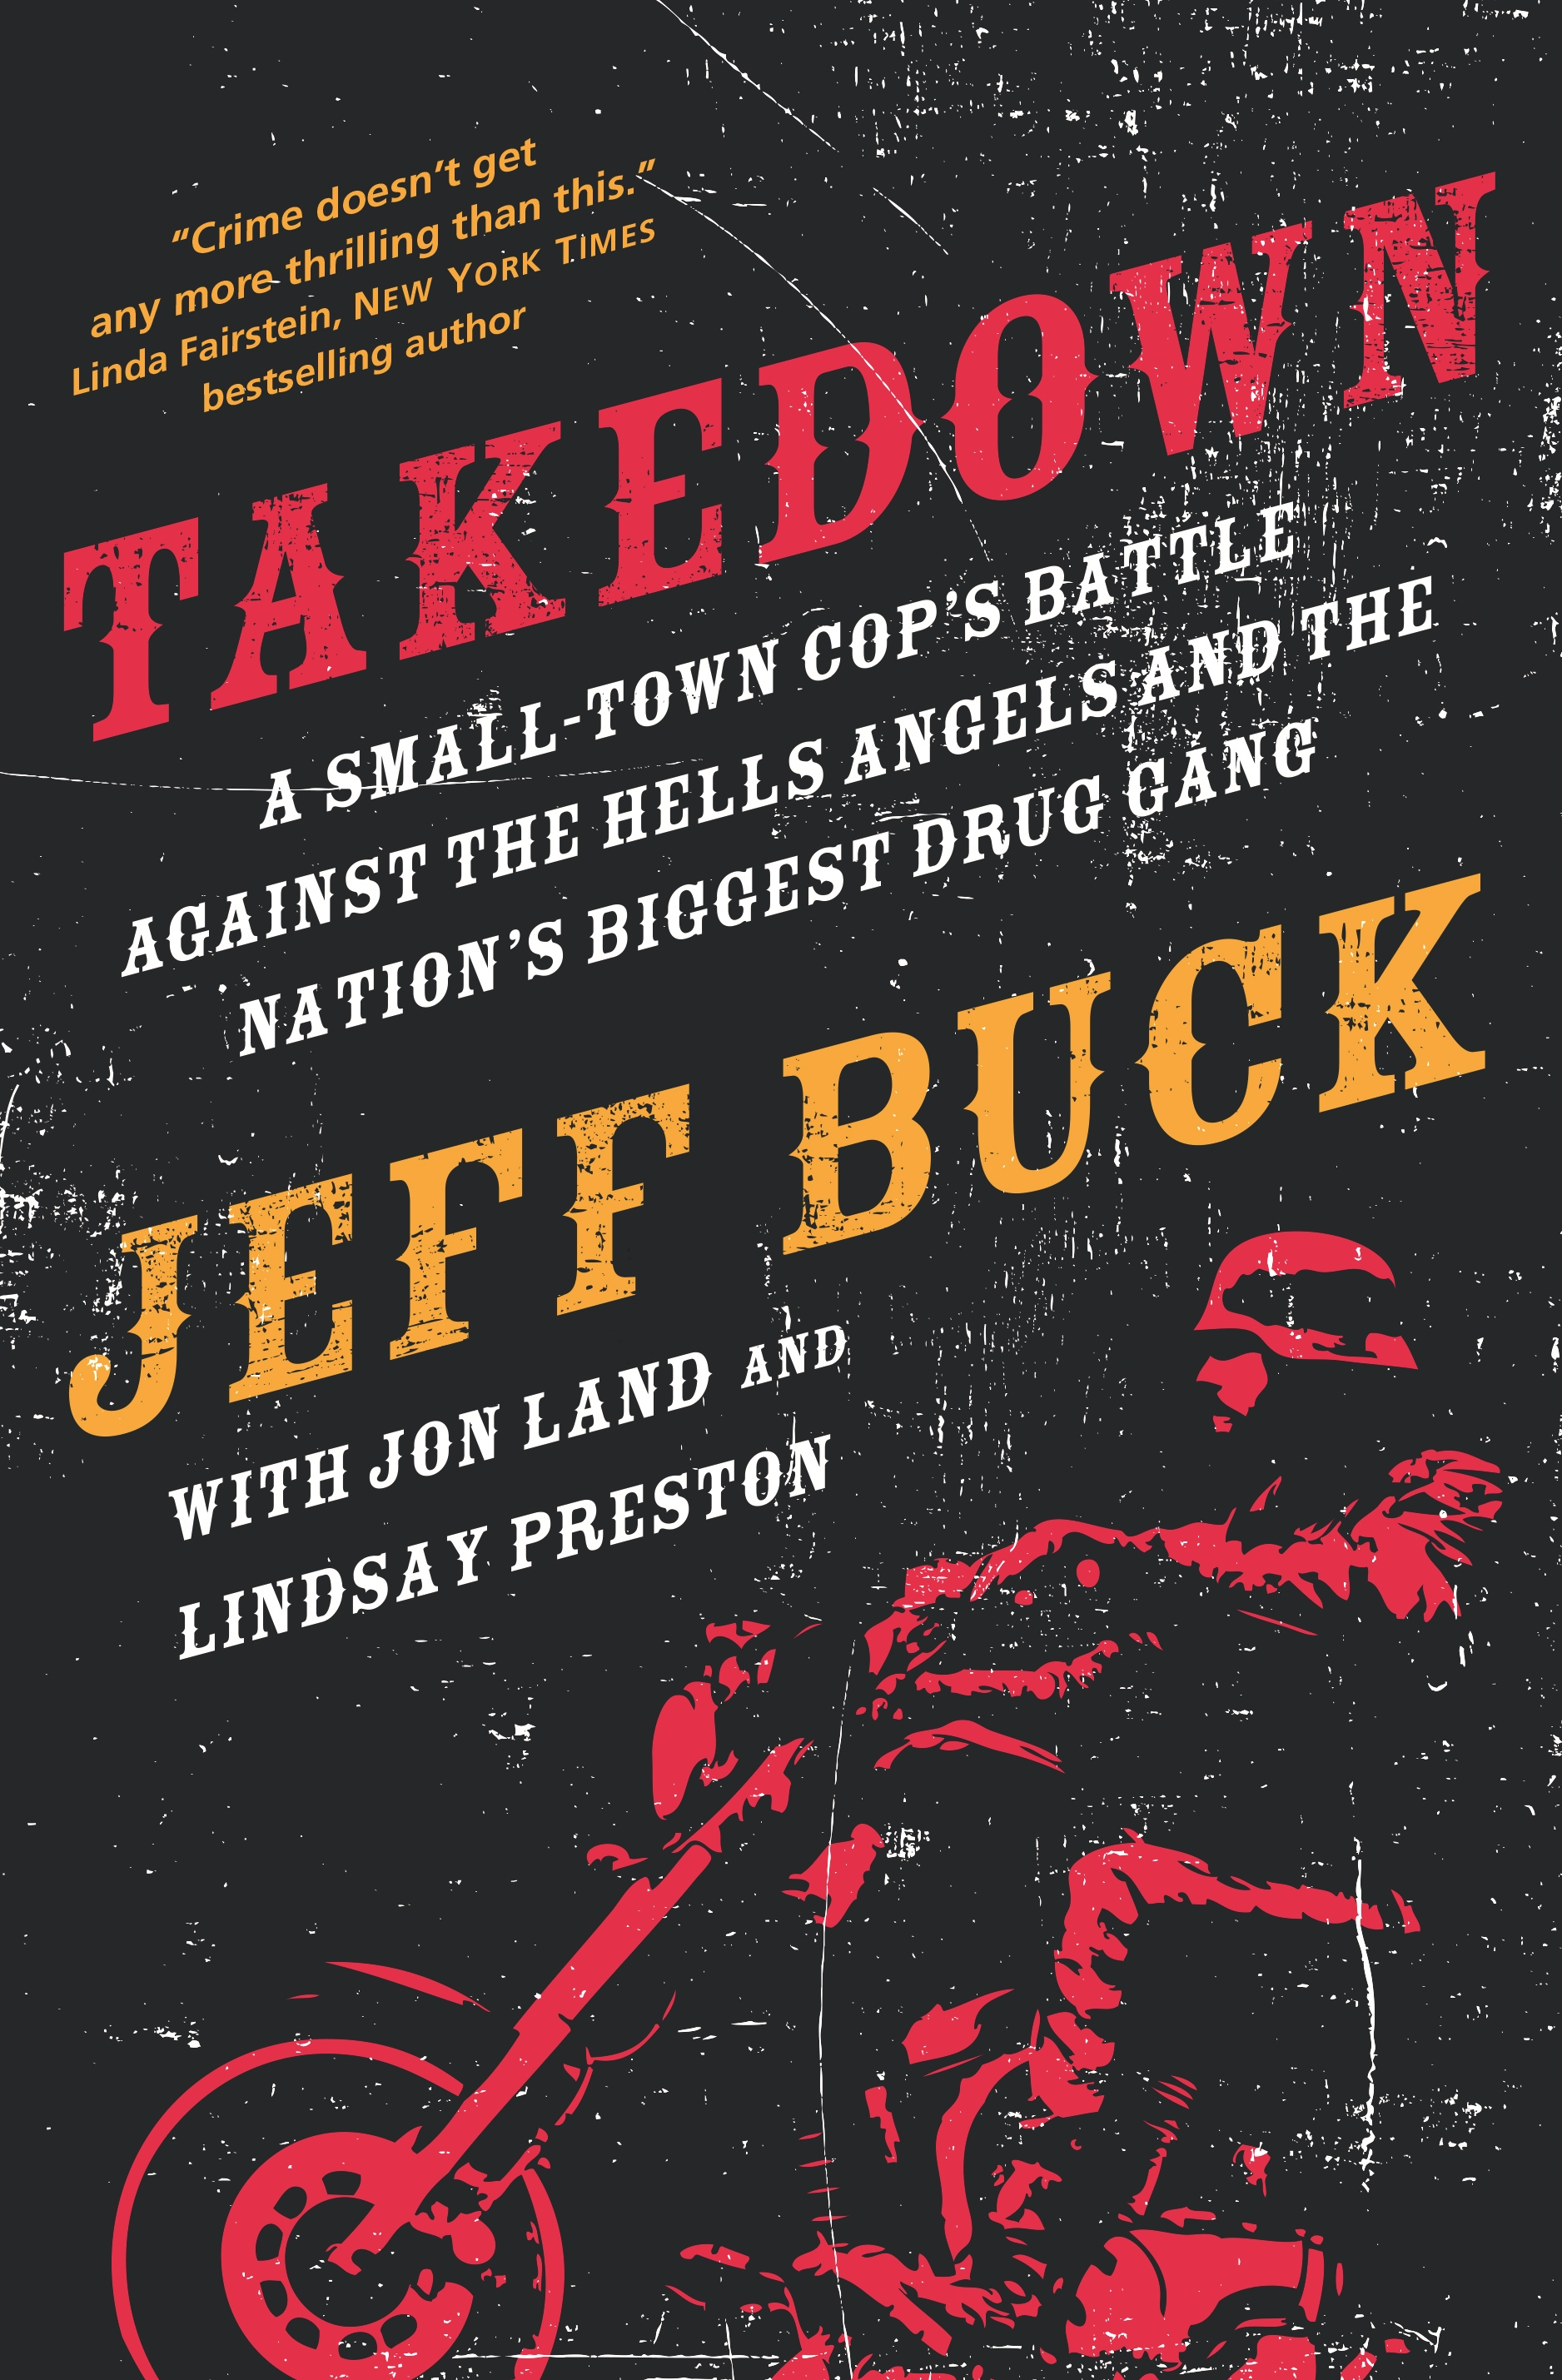 Takedown: A Small-Town Cop's Battle Against the Hells Angels and the Nation's Biggest Drug Gang by Jeff Buck, Jon Land, Lindsay Preston